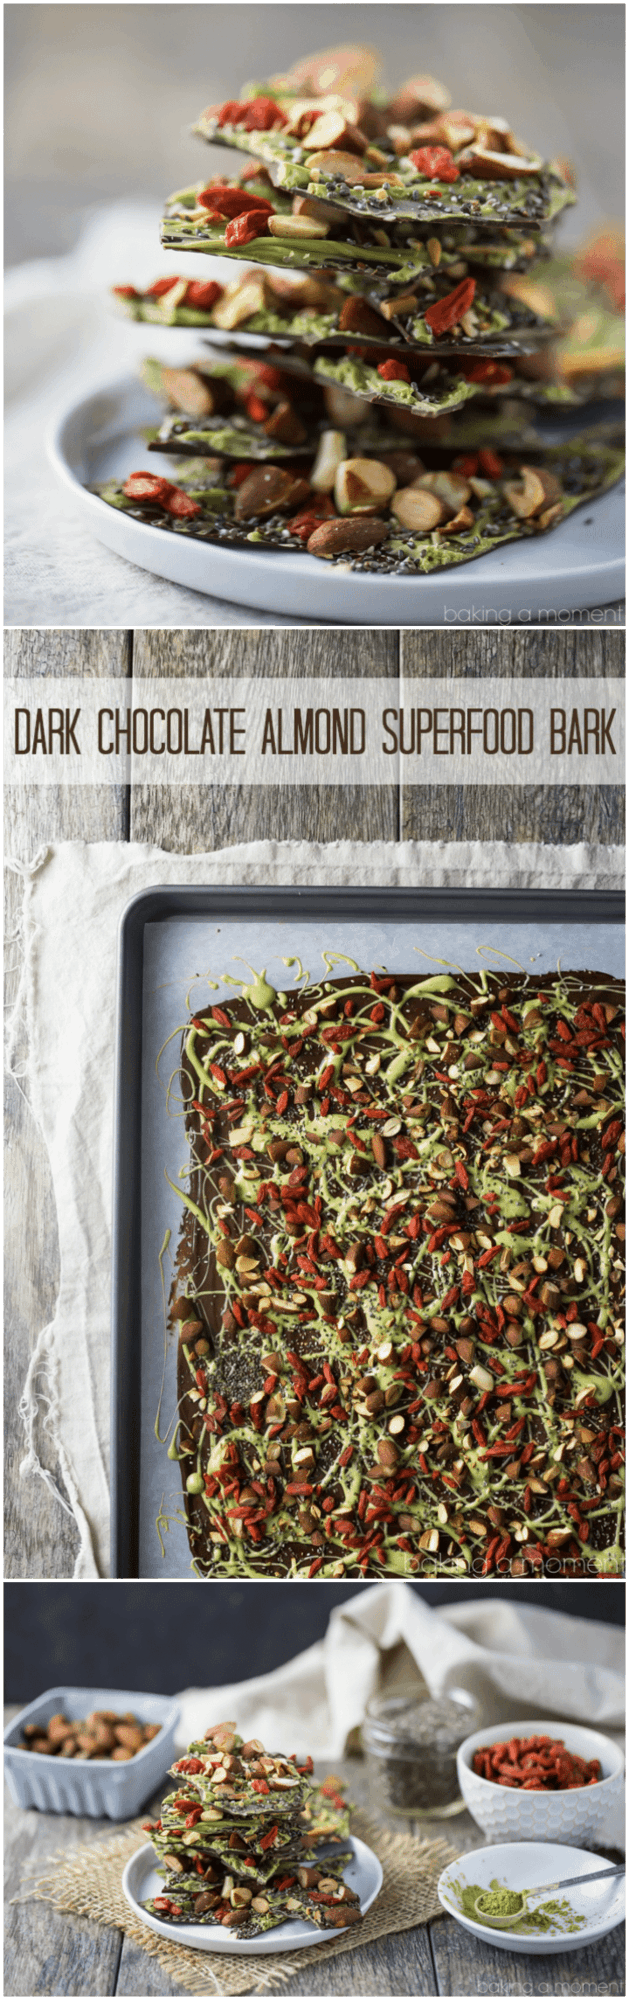 This Dark Chocolate Almond Superfood Bark is loaded with healthy ingredients like matcha, goji berries, and chia seeds. Makes a great homemade holiday gift! 